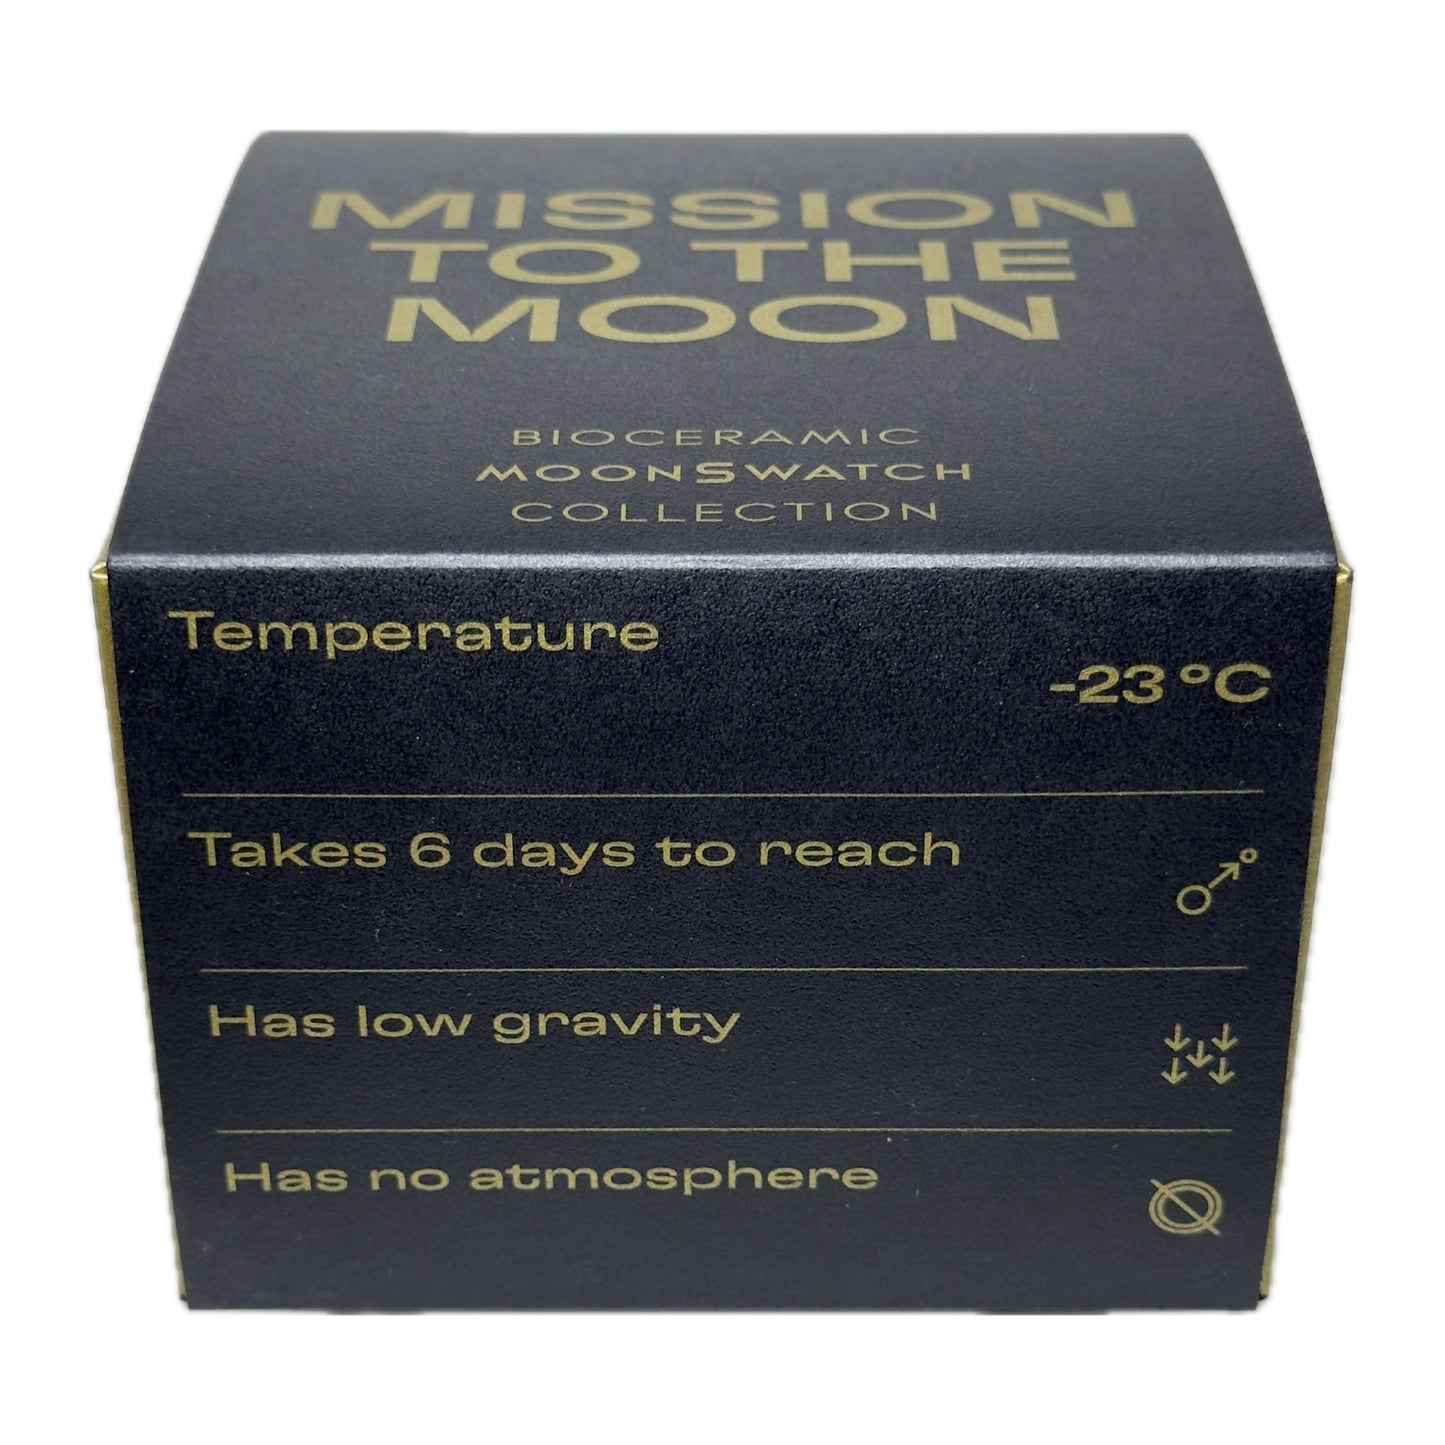 Swatch X Omega Moonswatch Mission to the Moon Moonshine Gold